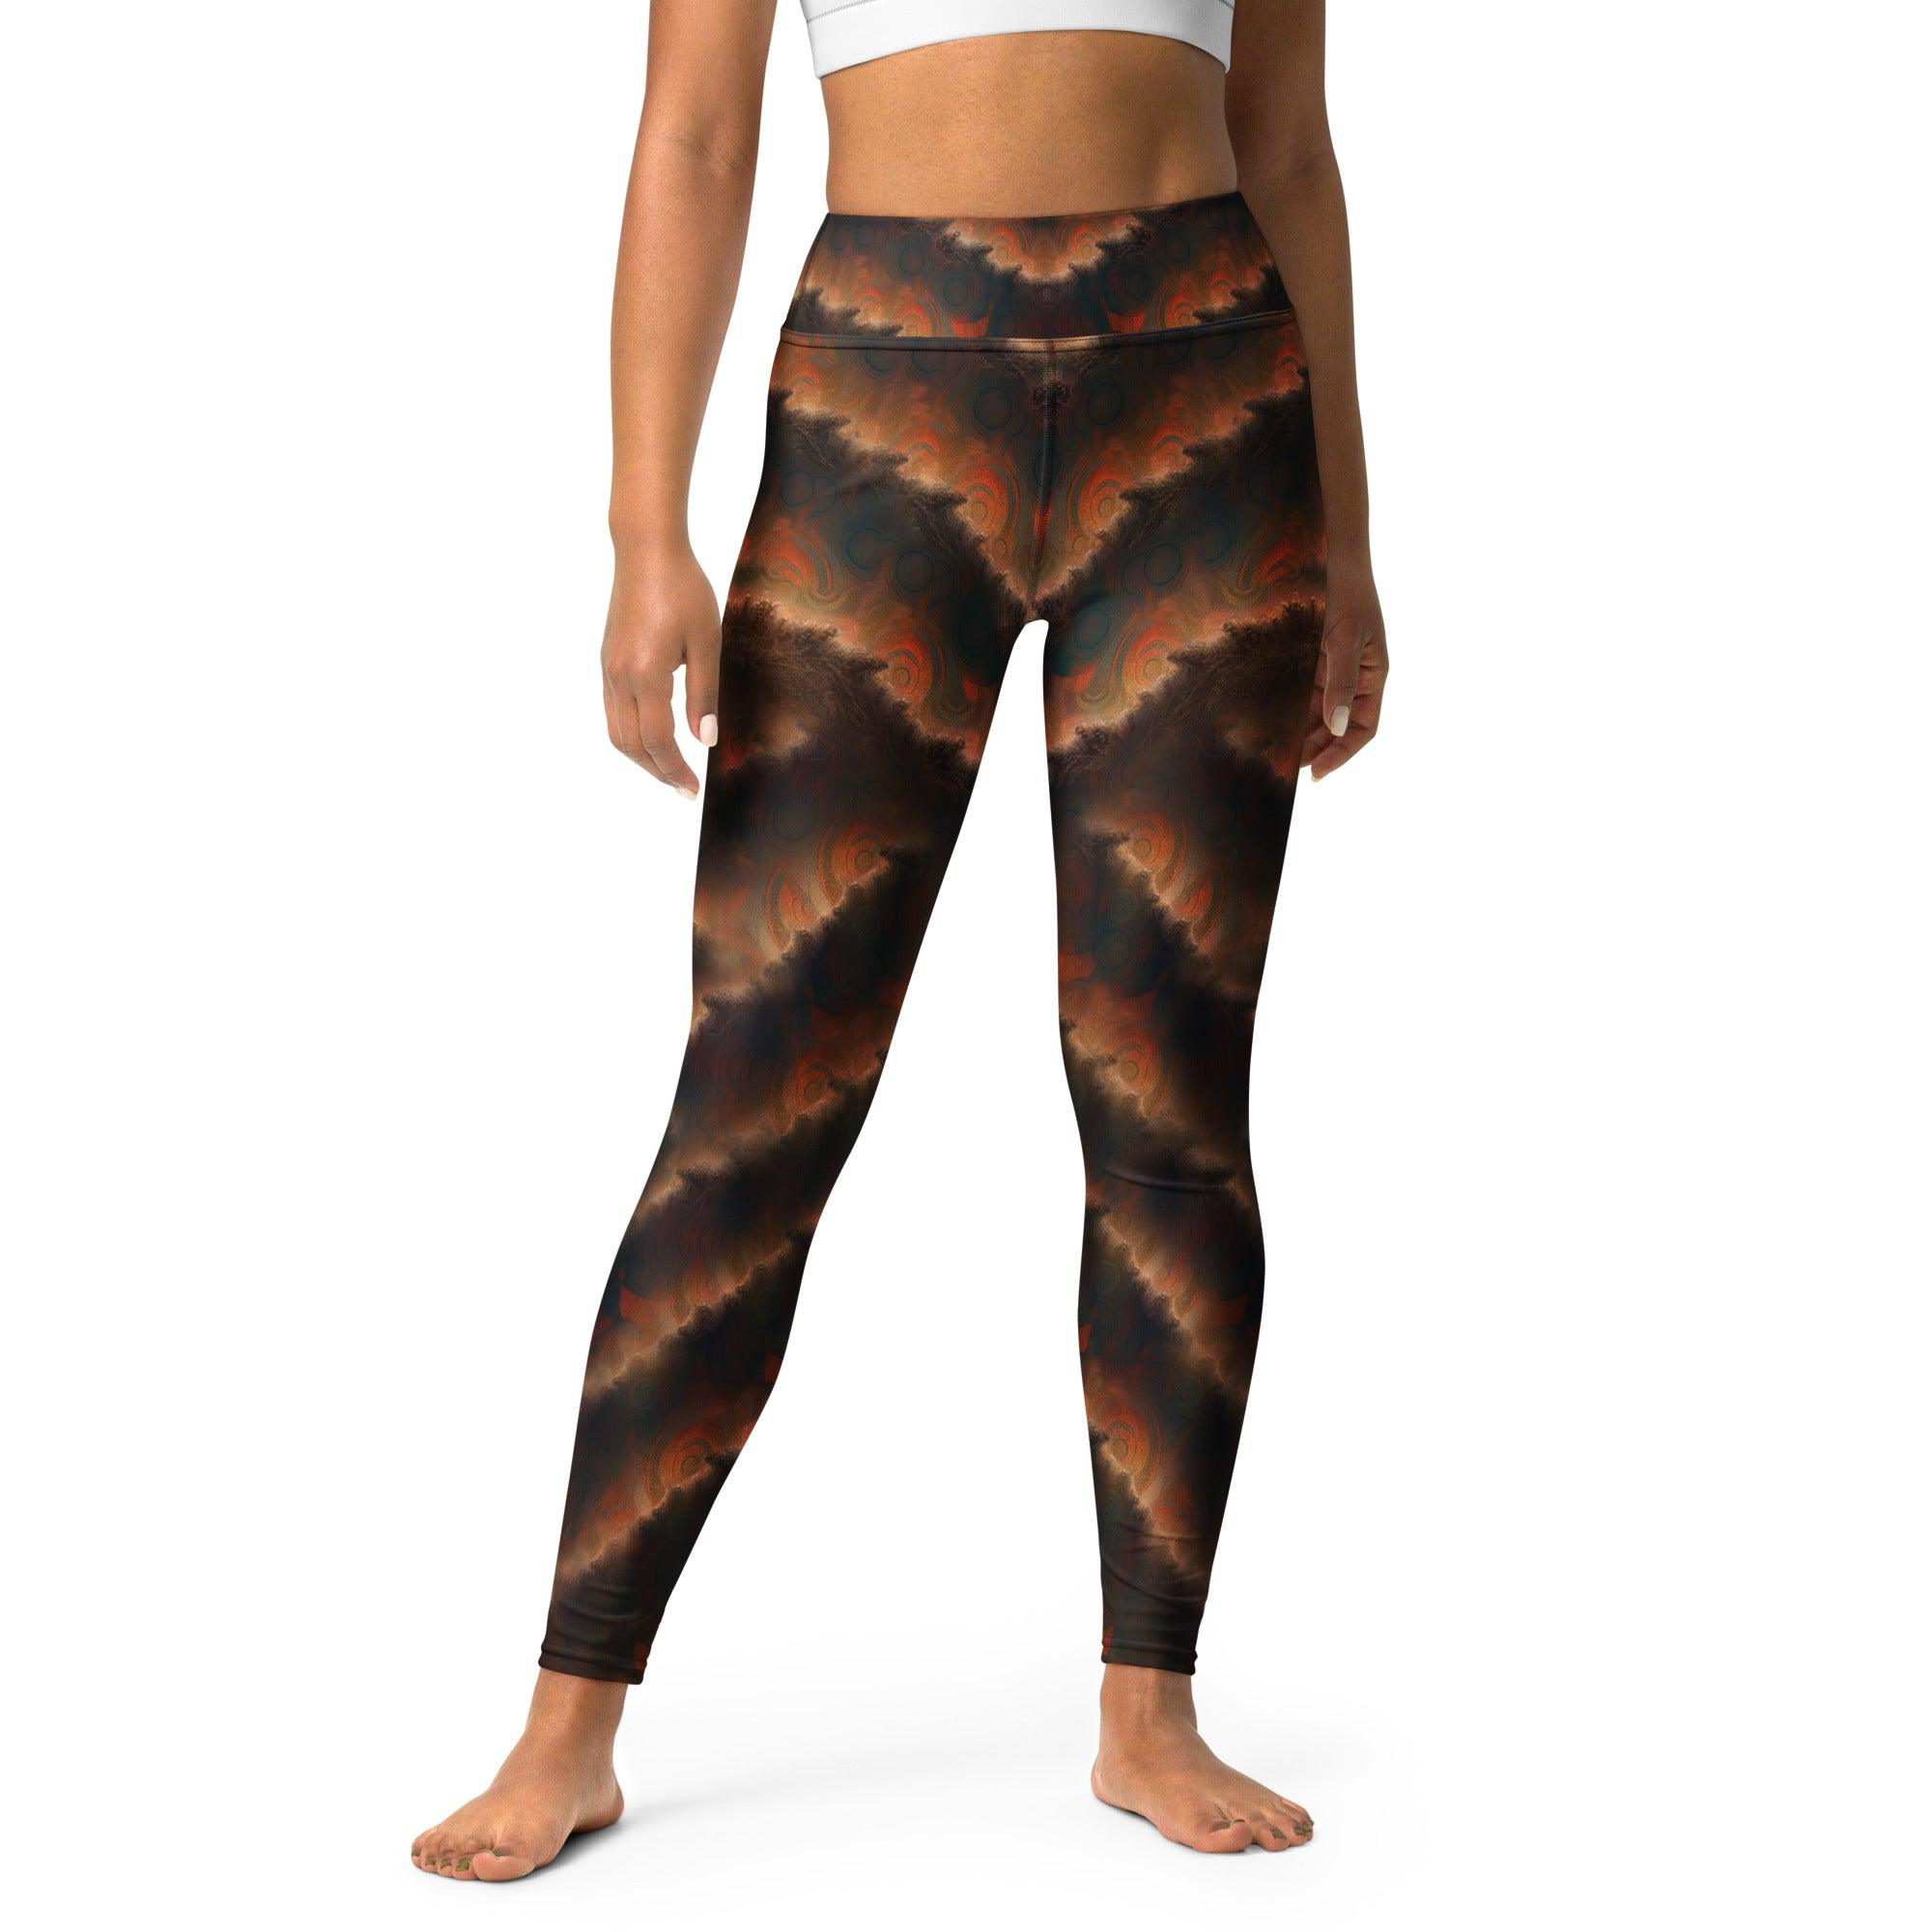 Enchanted Parade Yoga Leggings with vibrant print for active wear.